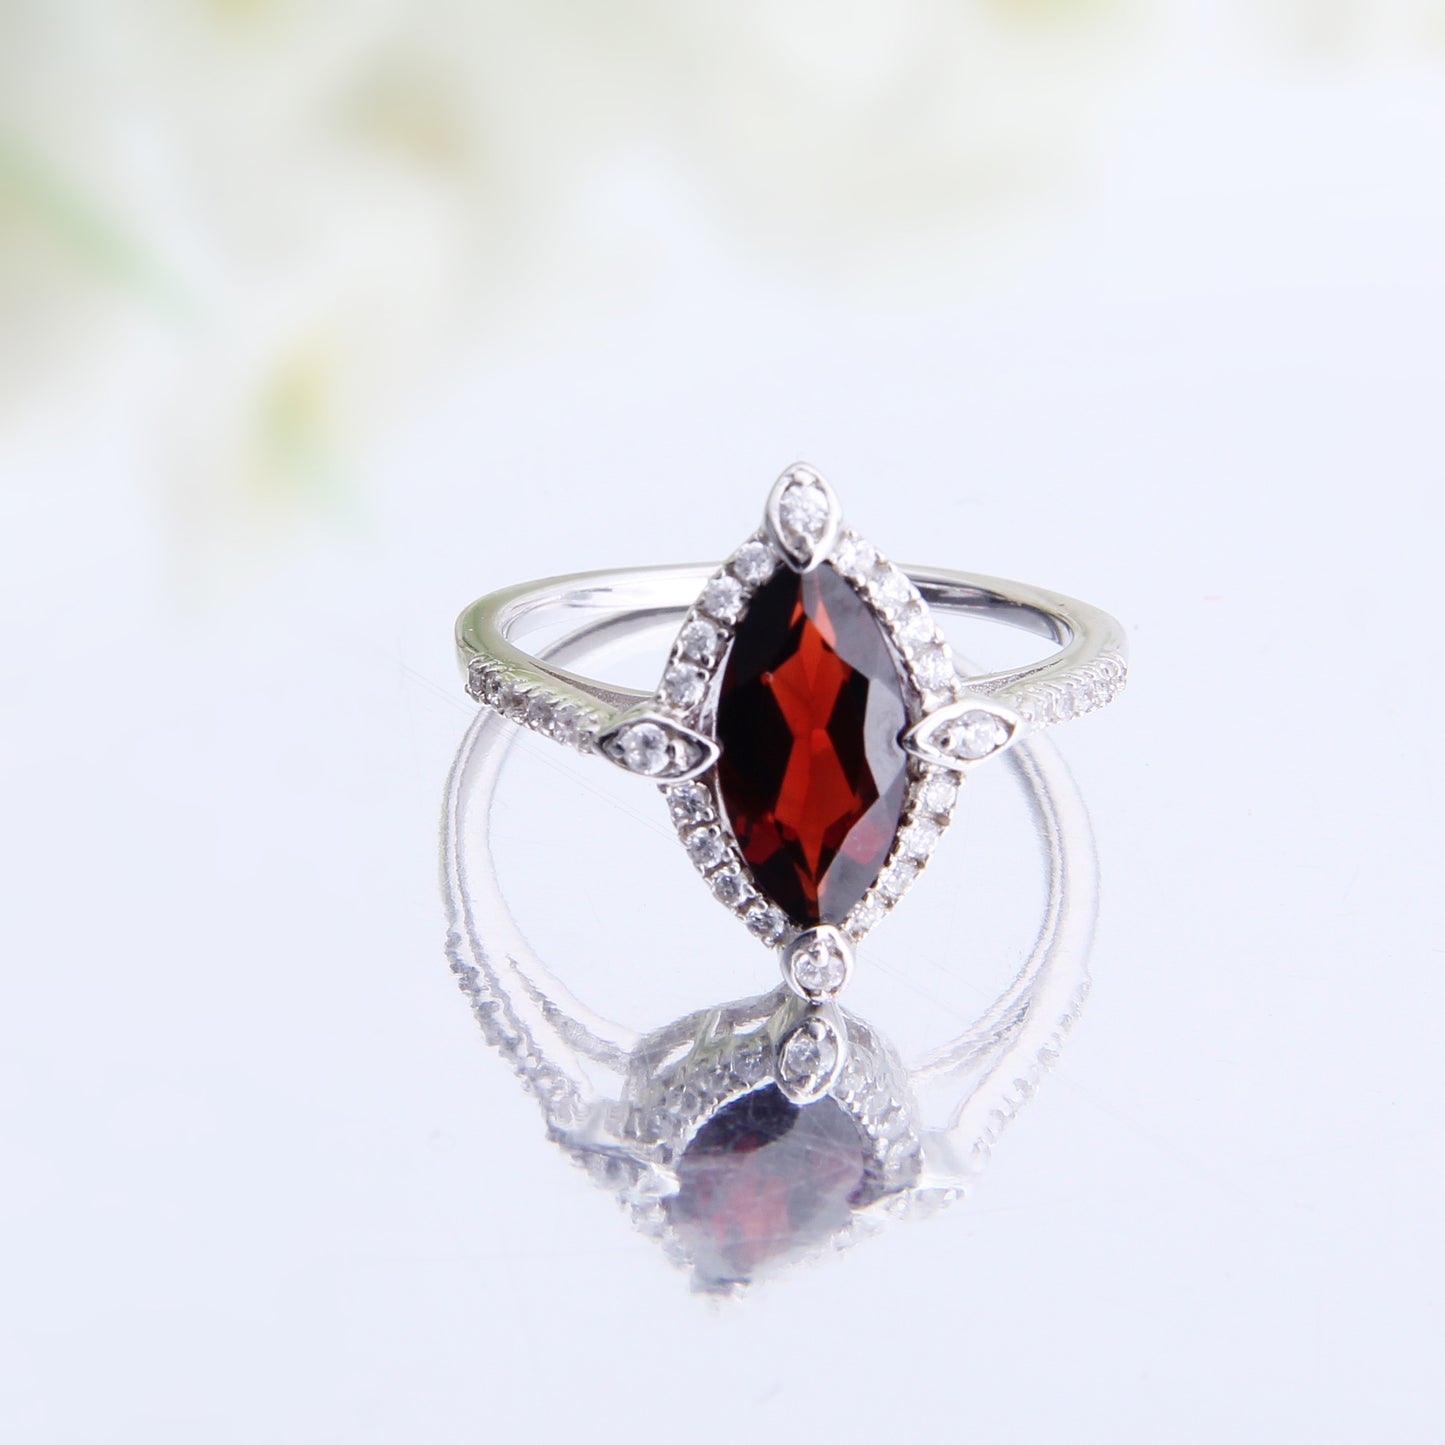 Luxurious High-grade Natural Garnet s925 Silver Inlaided Ring for Women